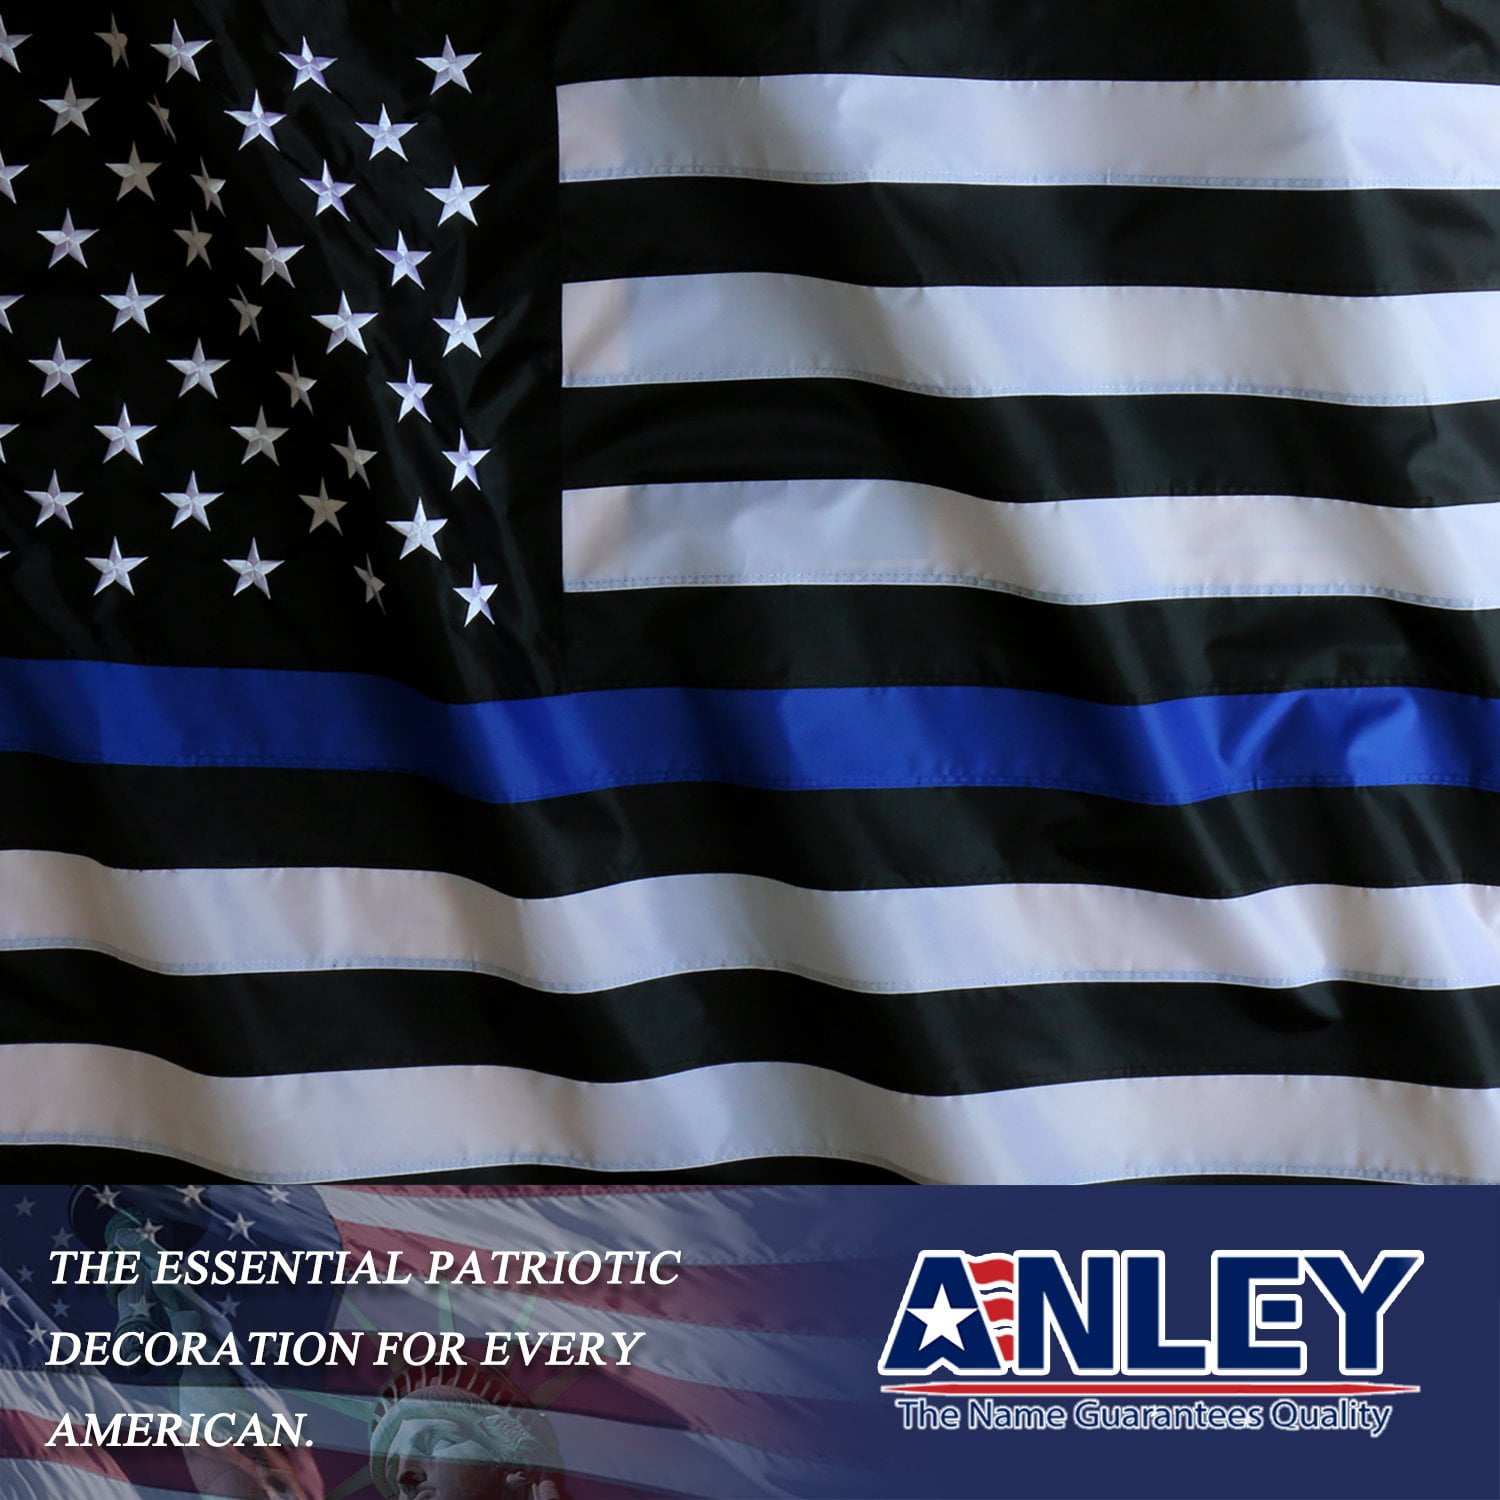 USA American Flag Police Honor Law Enforcement 2 Pack 3x5 Foot Thin Blue Line 